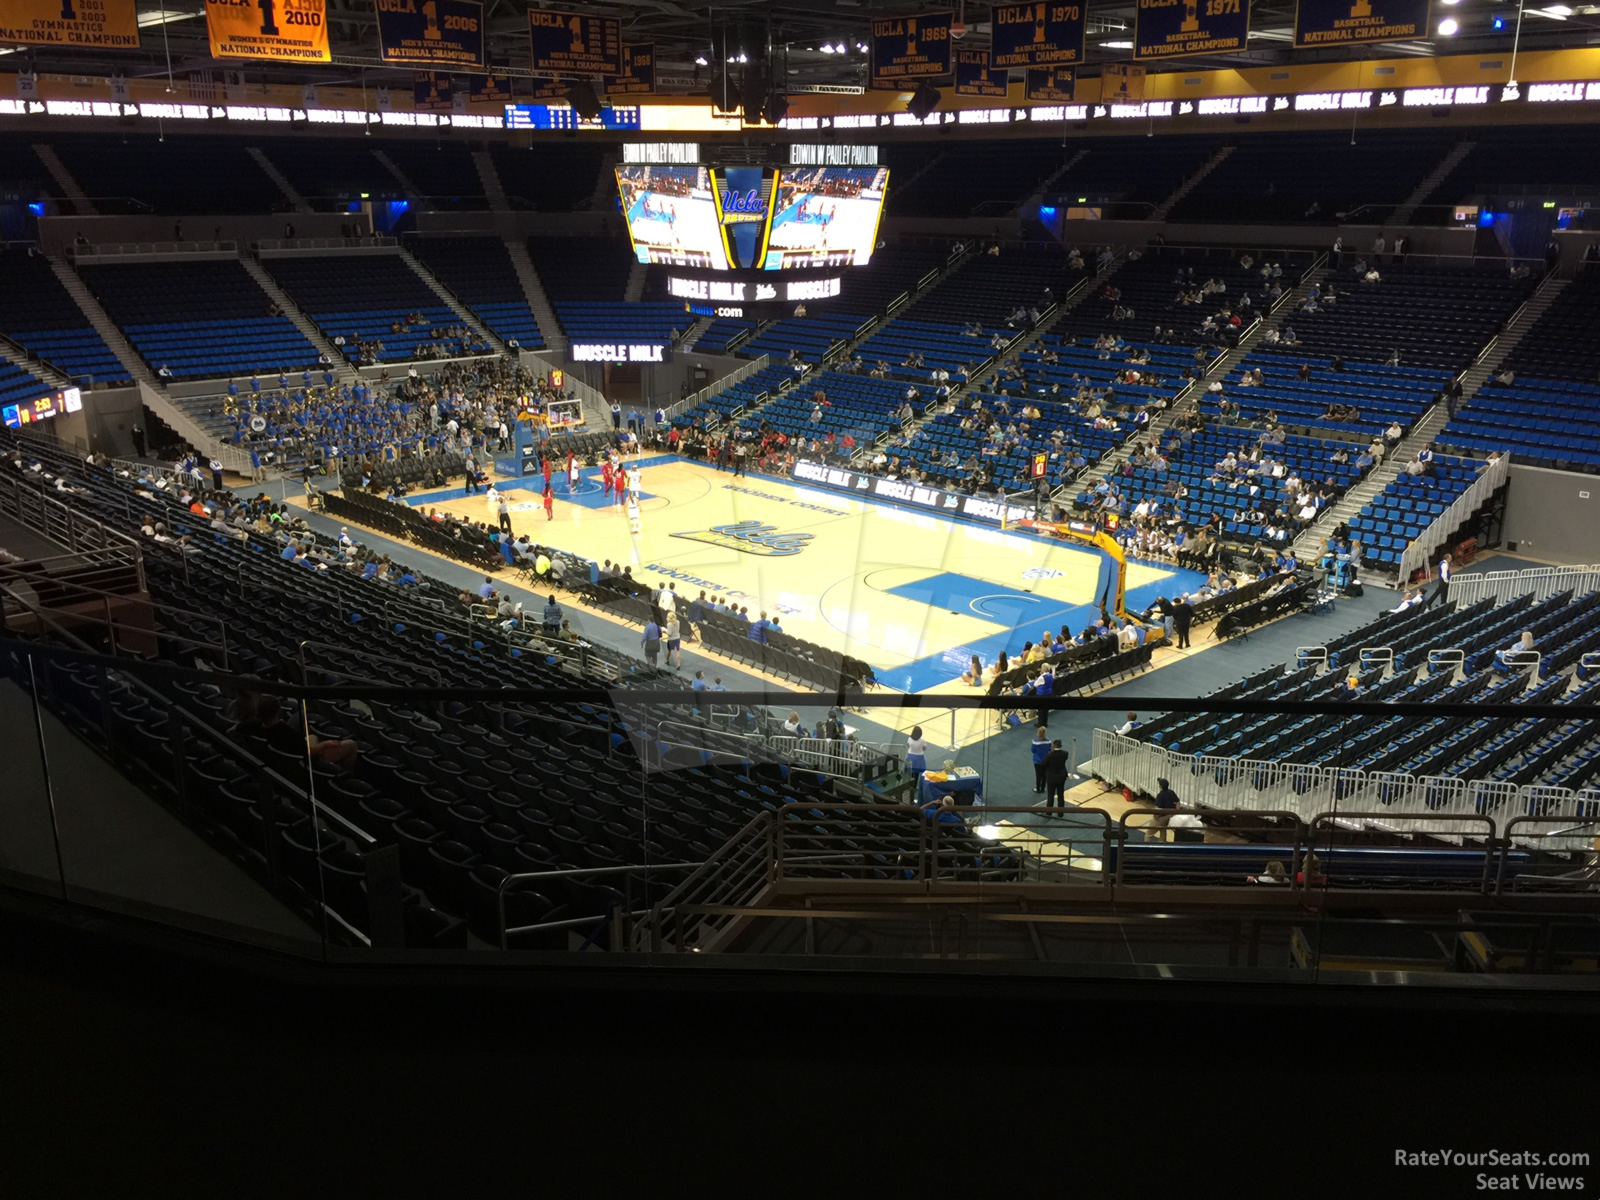 section 211c, row 6 seat view  - pauley pavilion